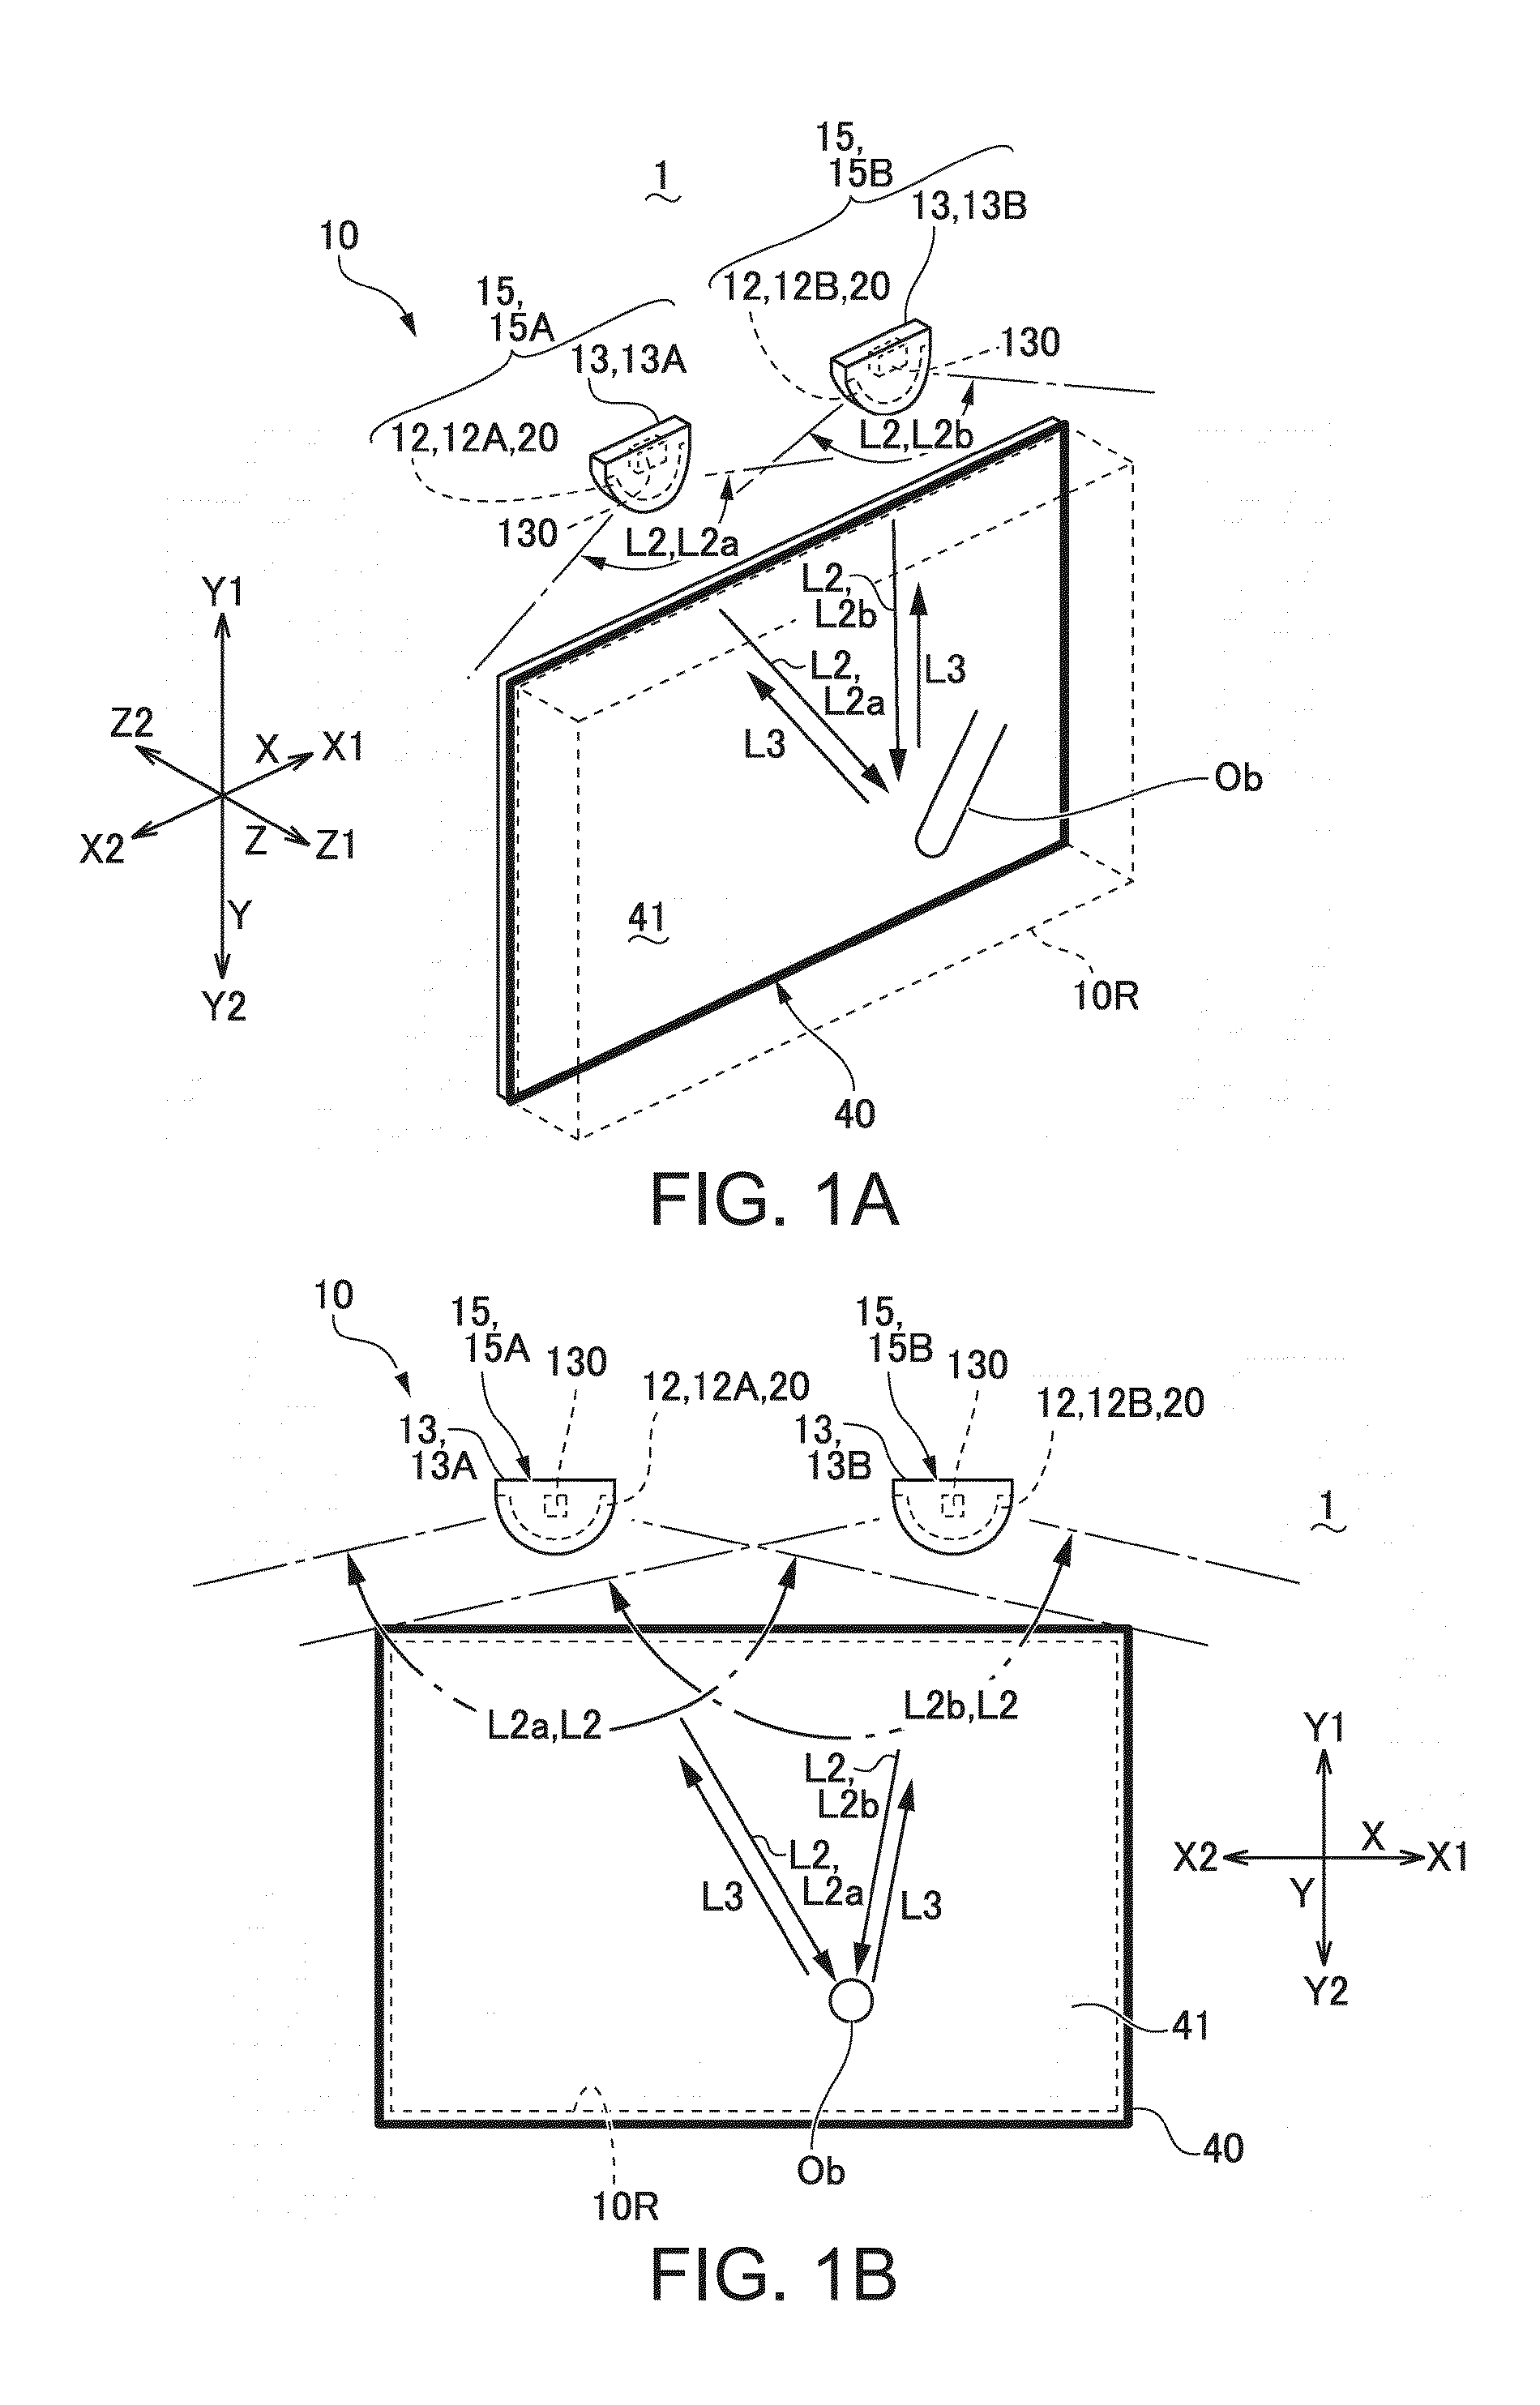 Optical position detection device and display system with input function